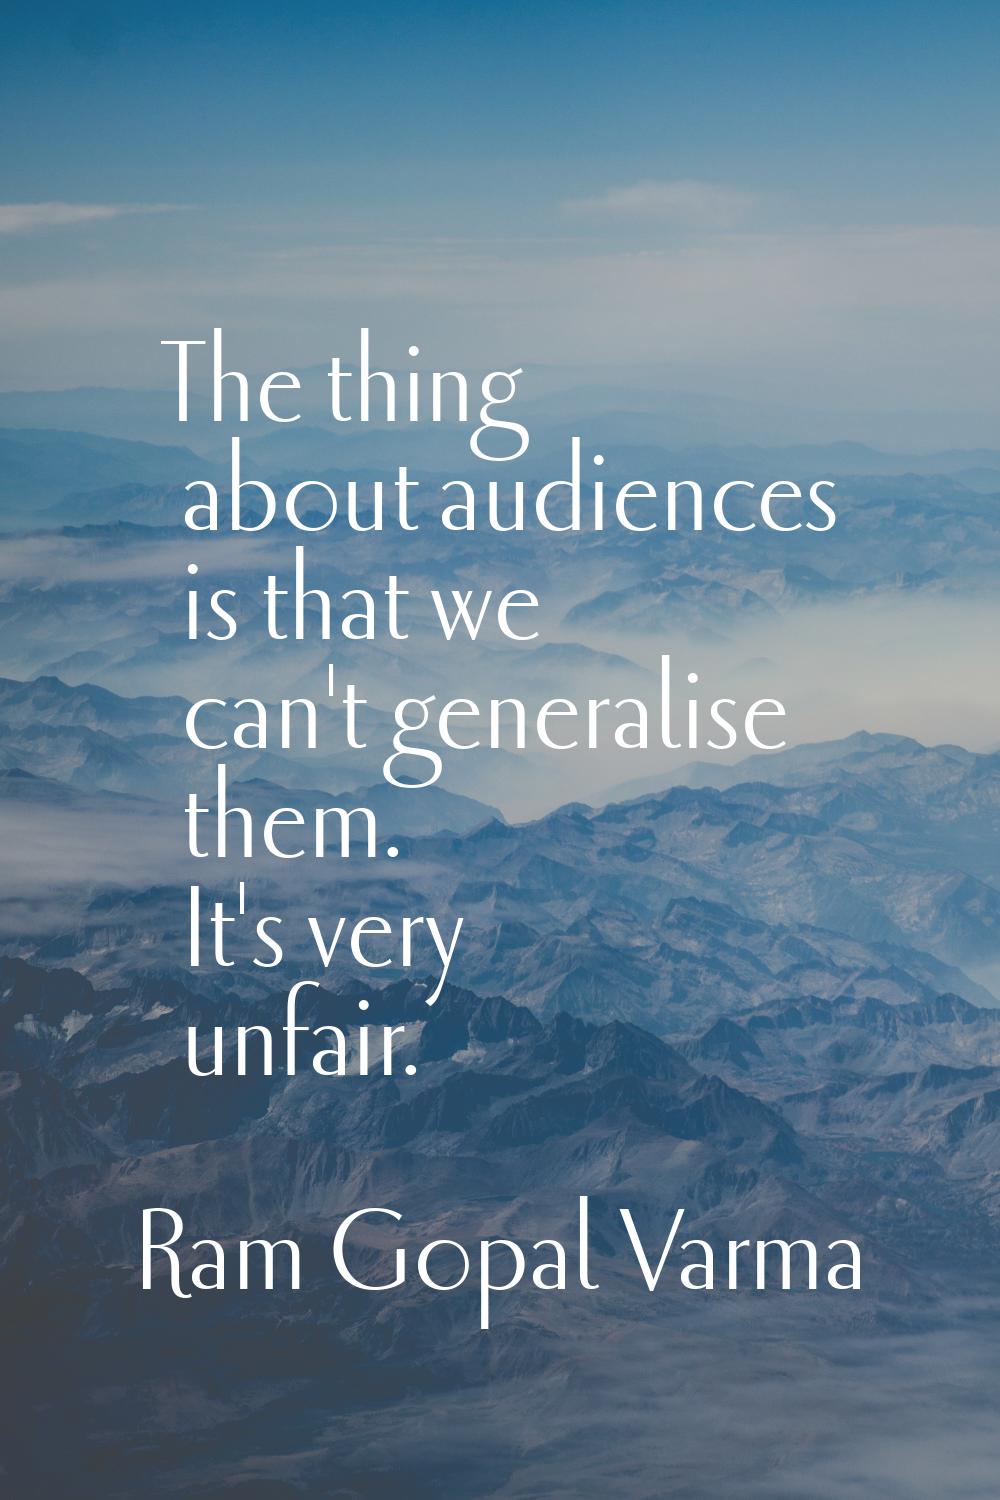 The thing about audiences is that we can't generalise them. It's very unfair.